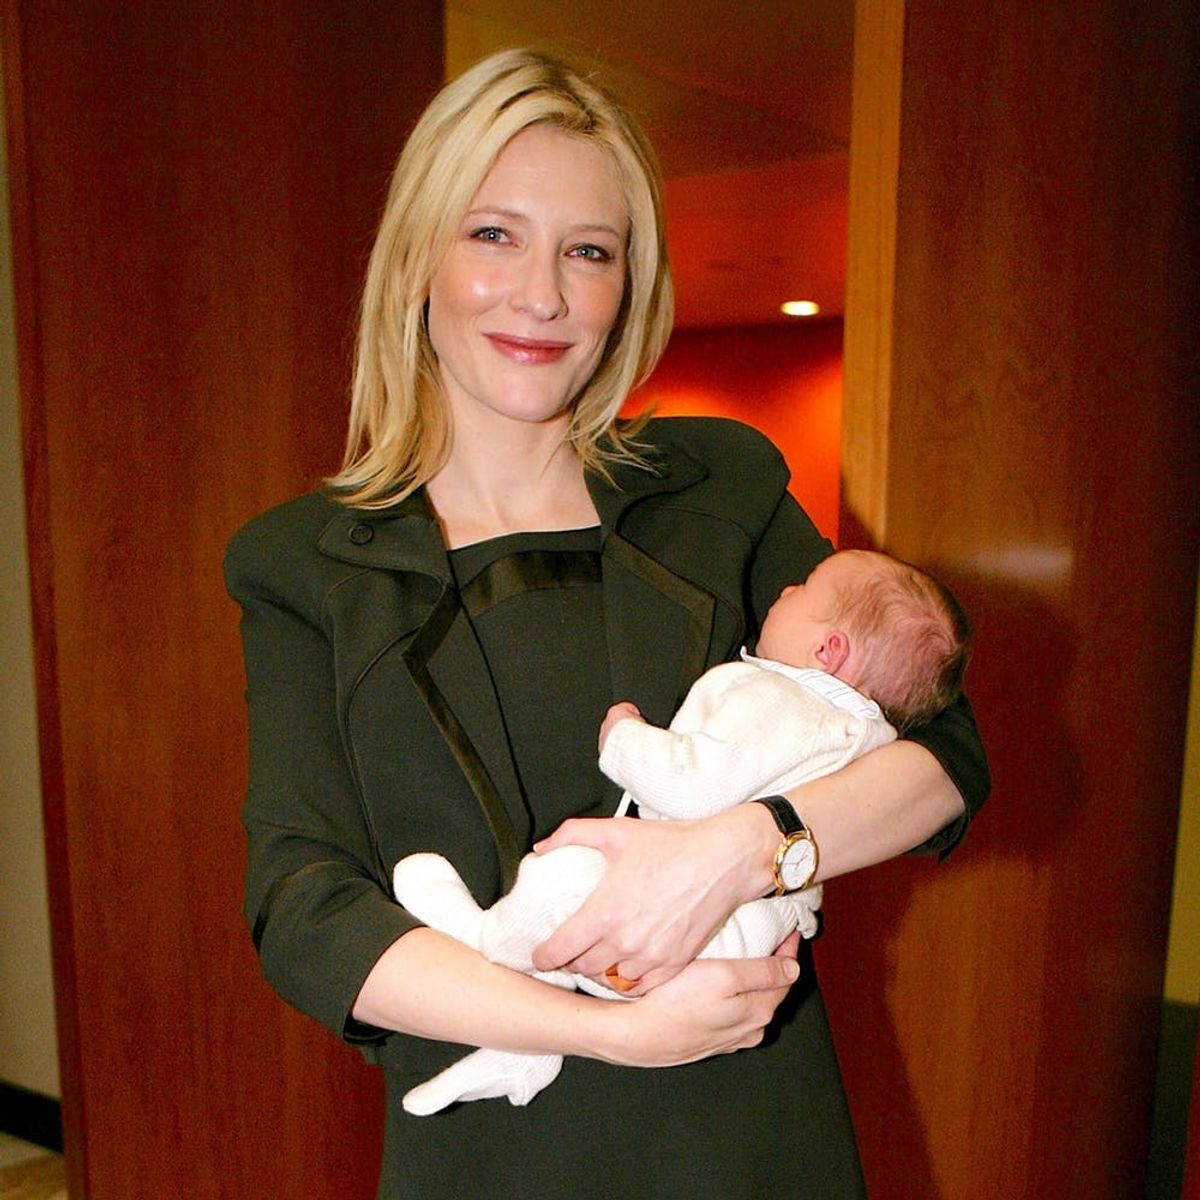 The Hilarious Place Cate Blanchett Found Her Baby Name Proves Inspiration Can Strike ANYWHERE